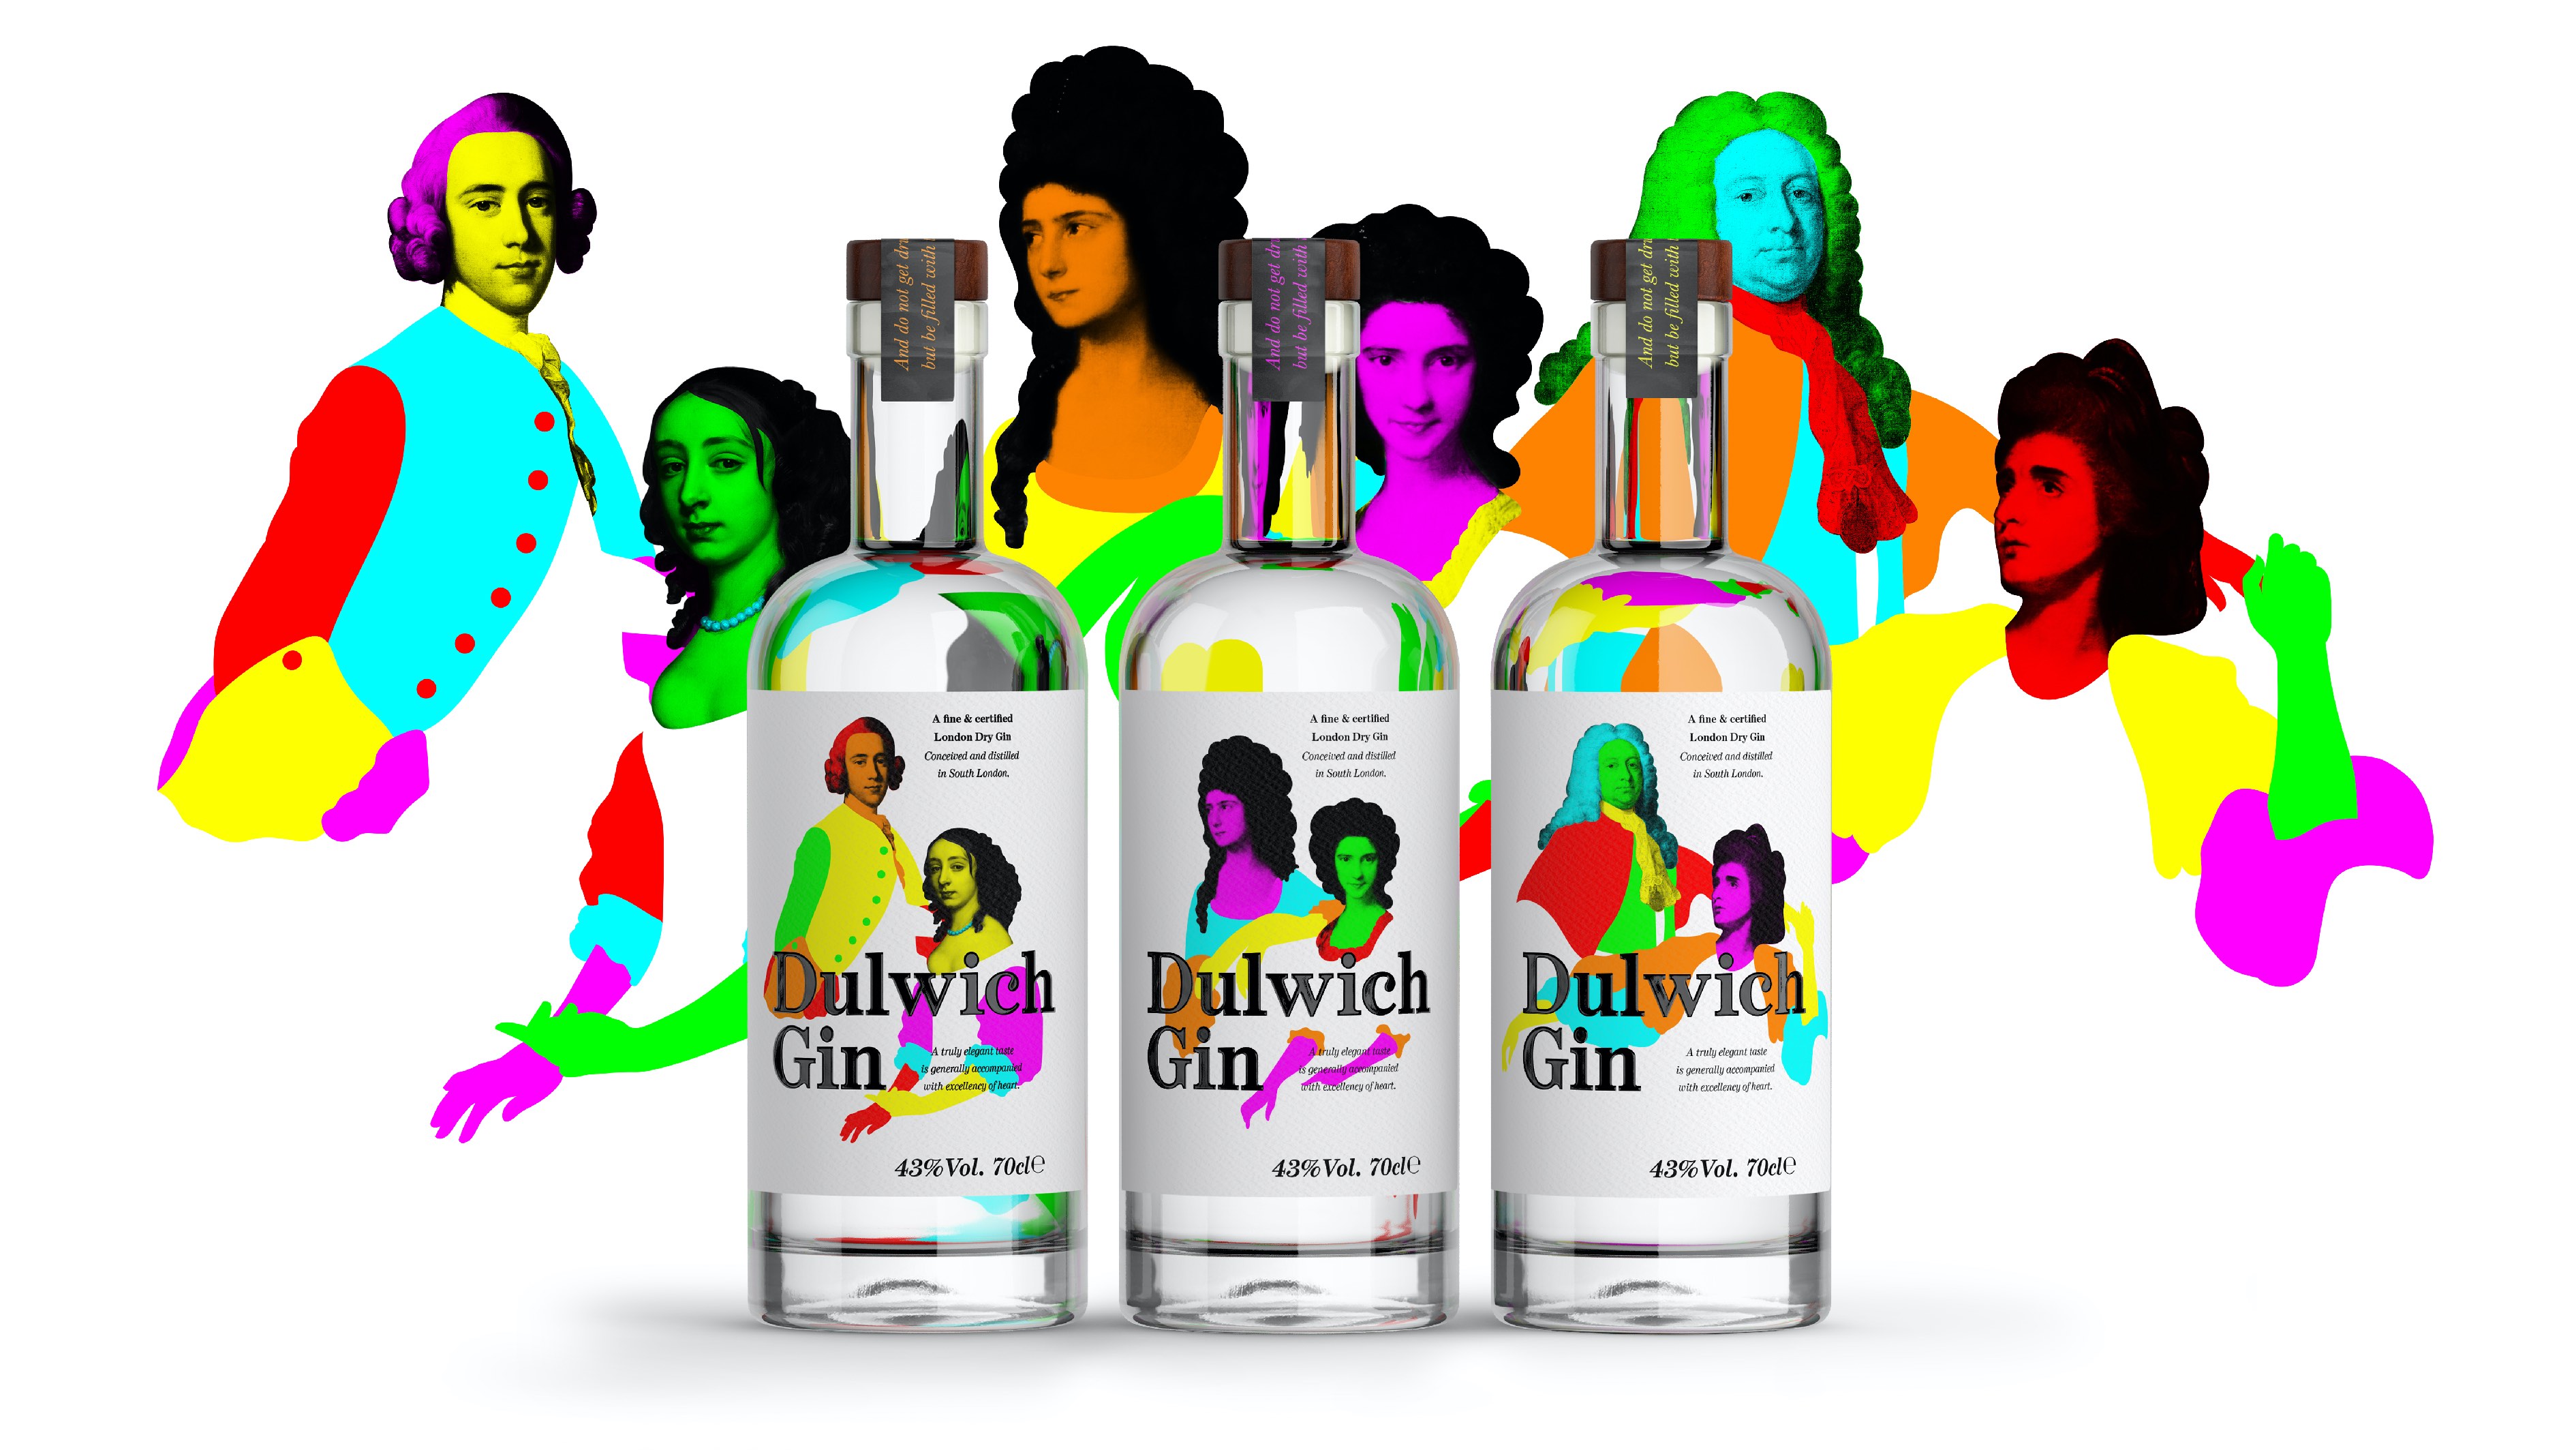 No Two Bottles Alike – The Design of Dulwich Gin